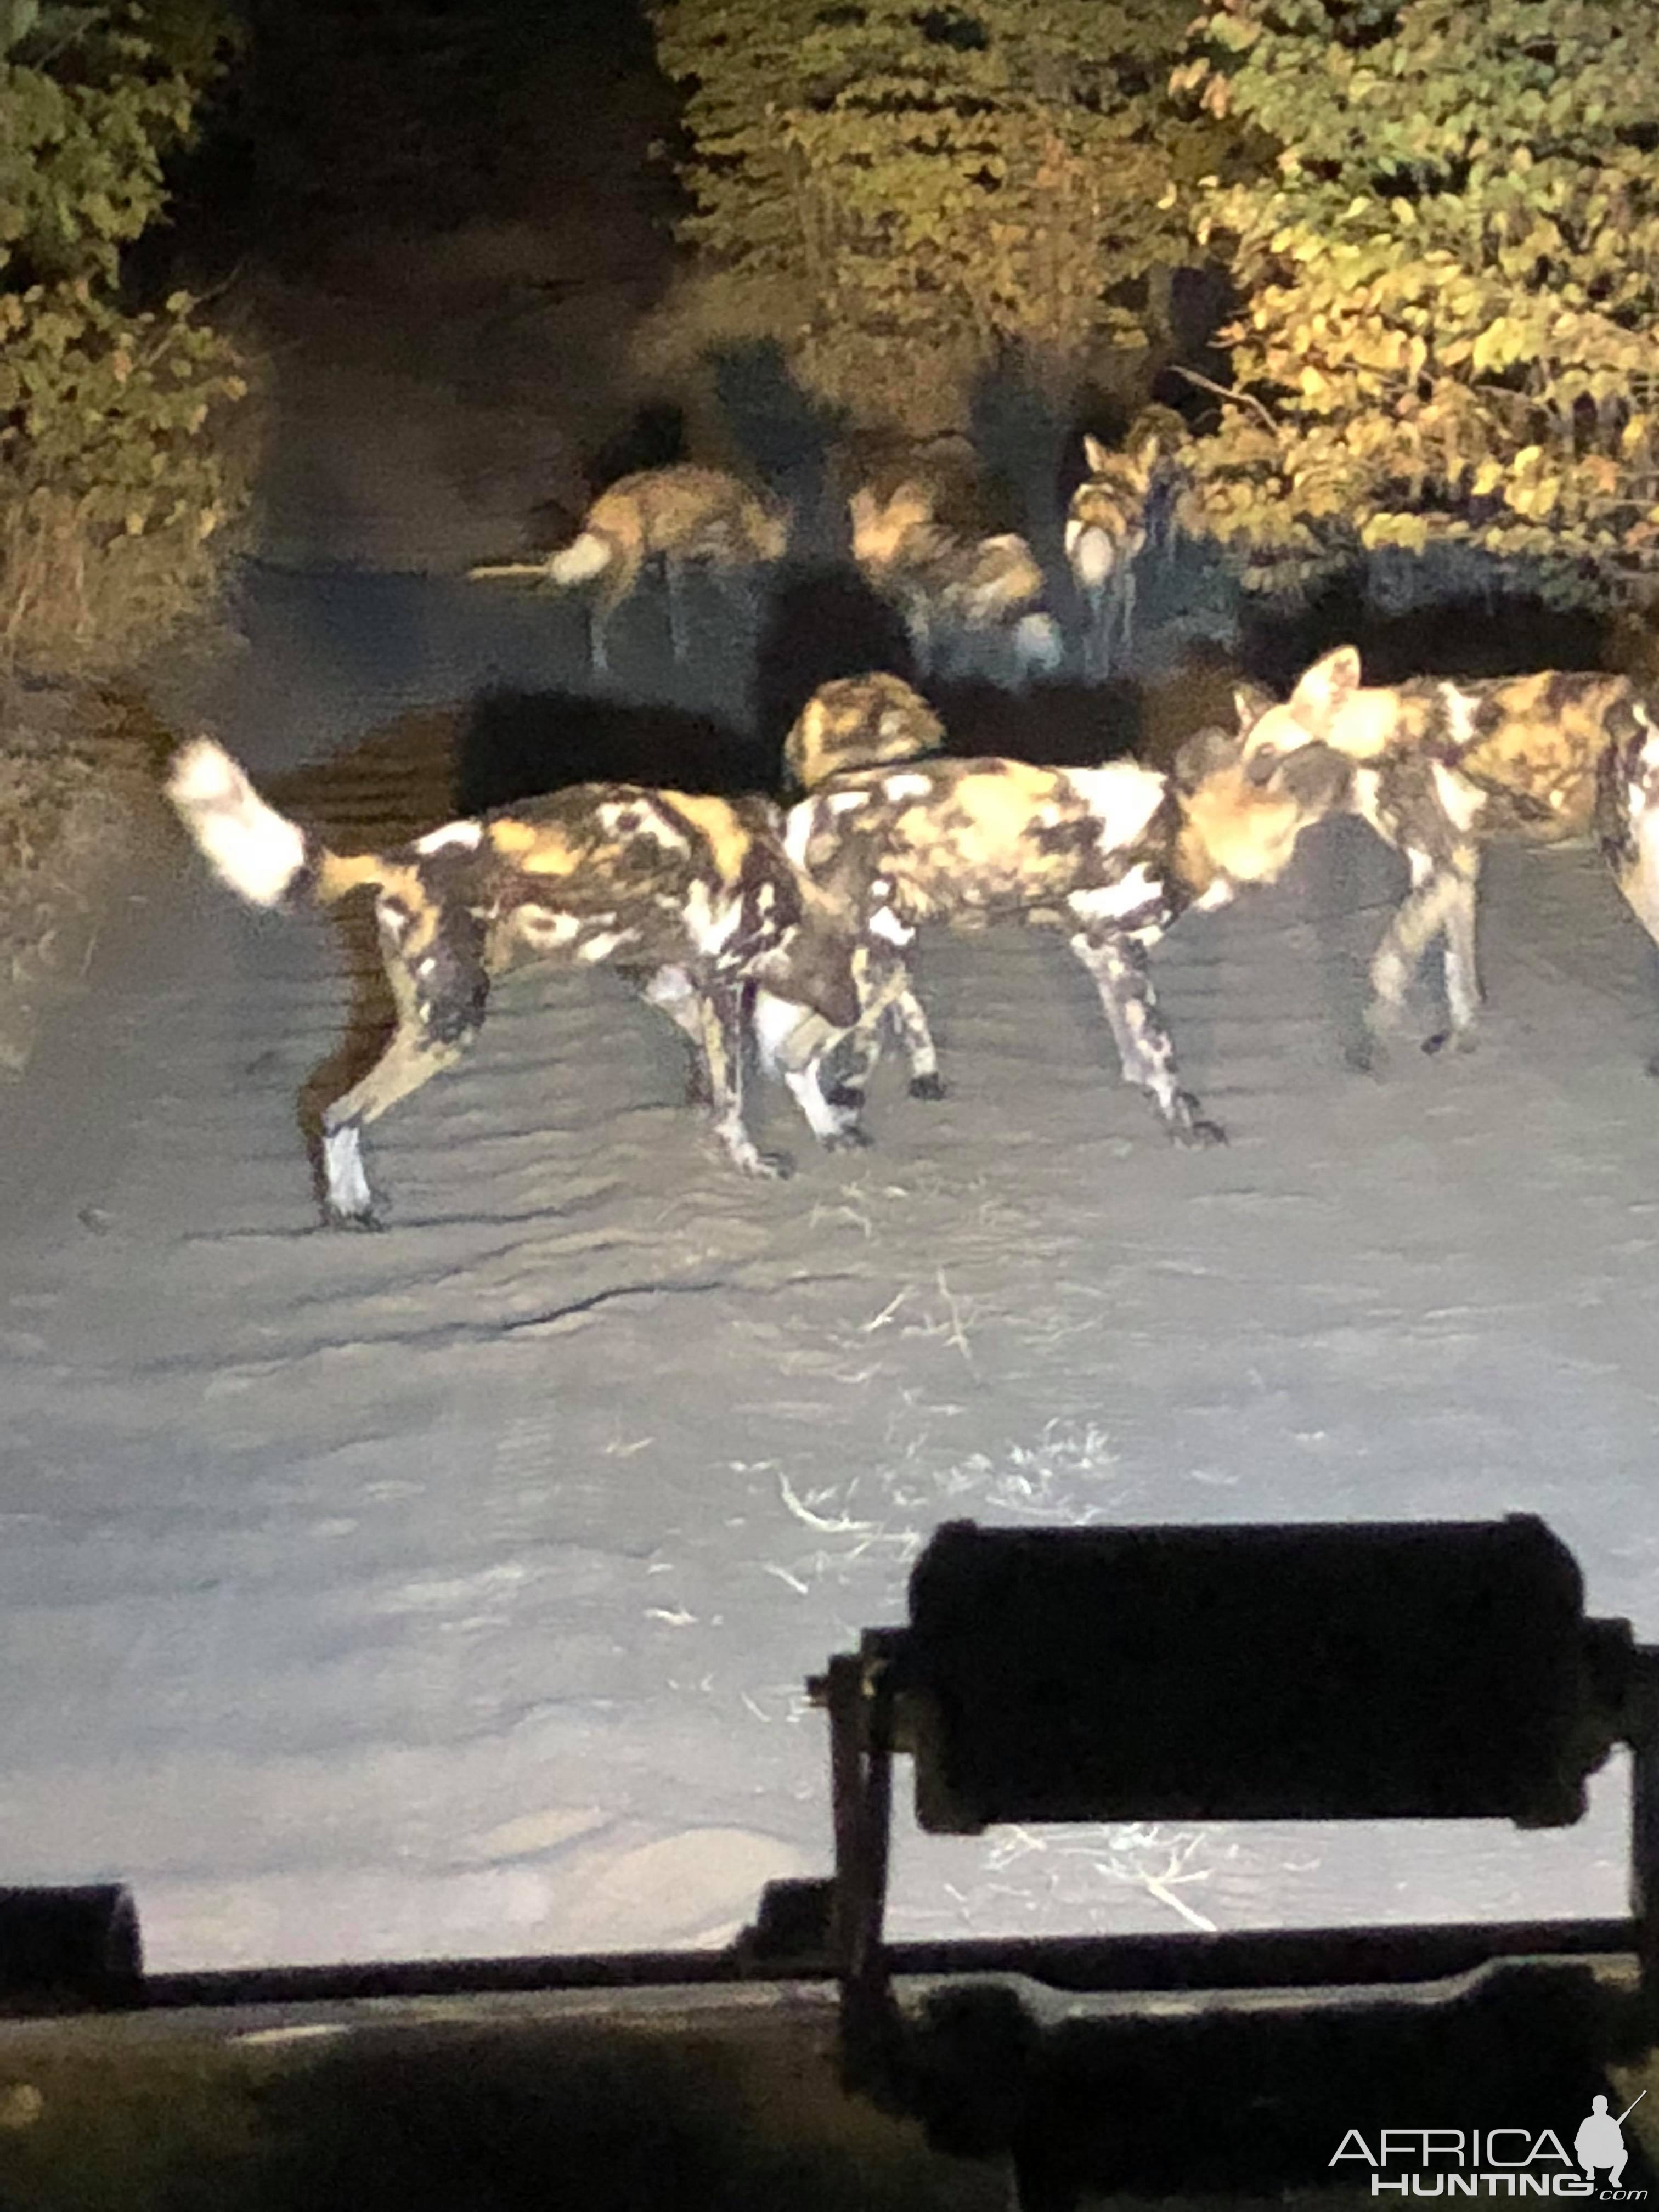 Pack of Wild Dogs in Zambia